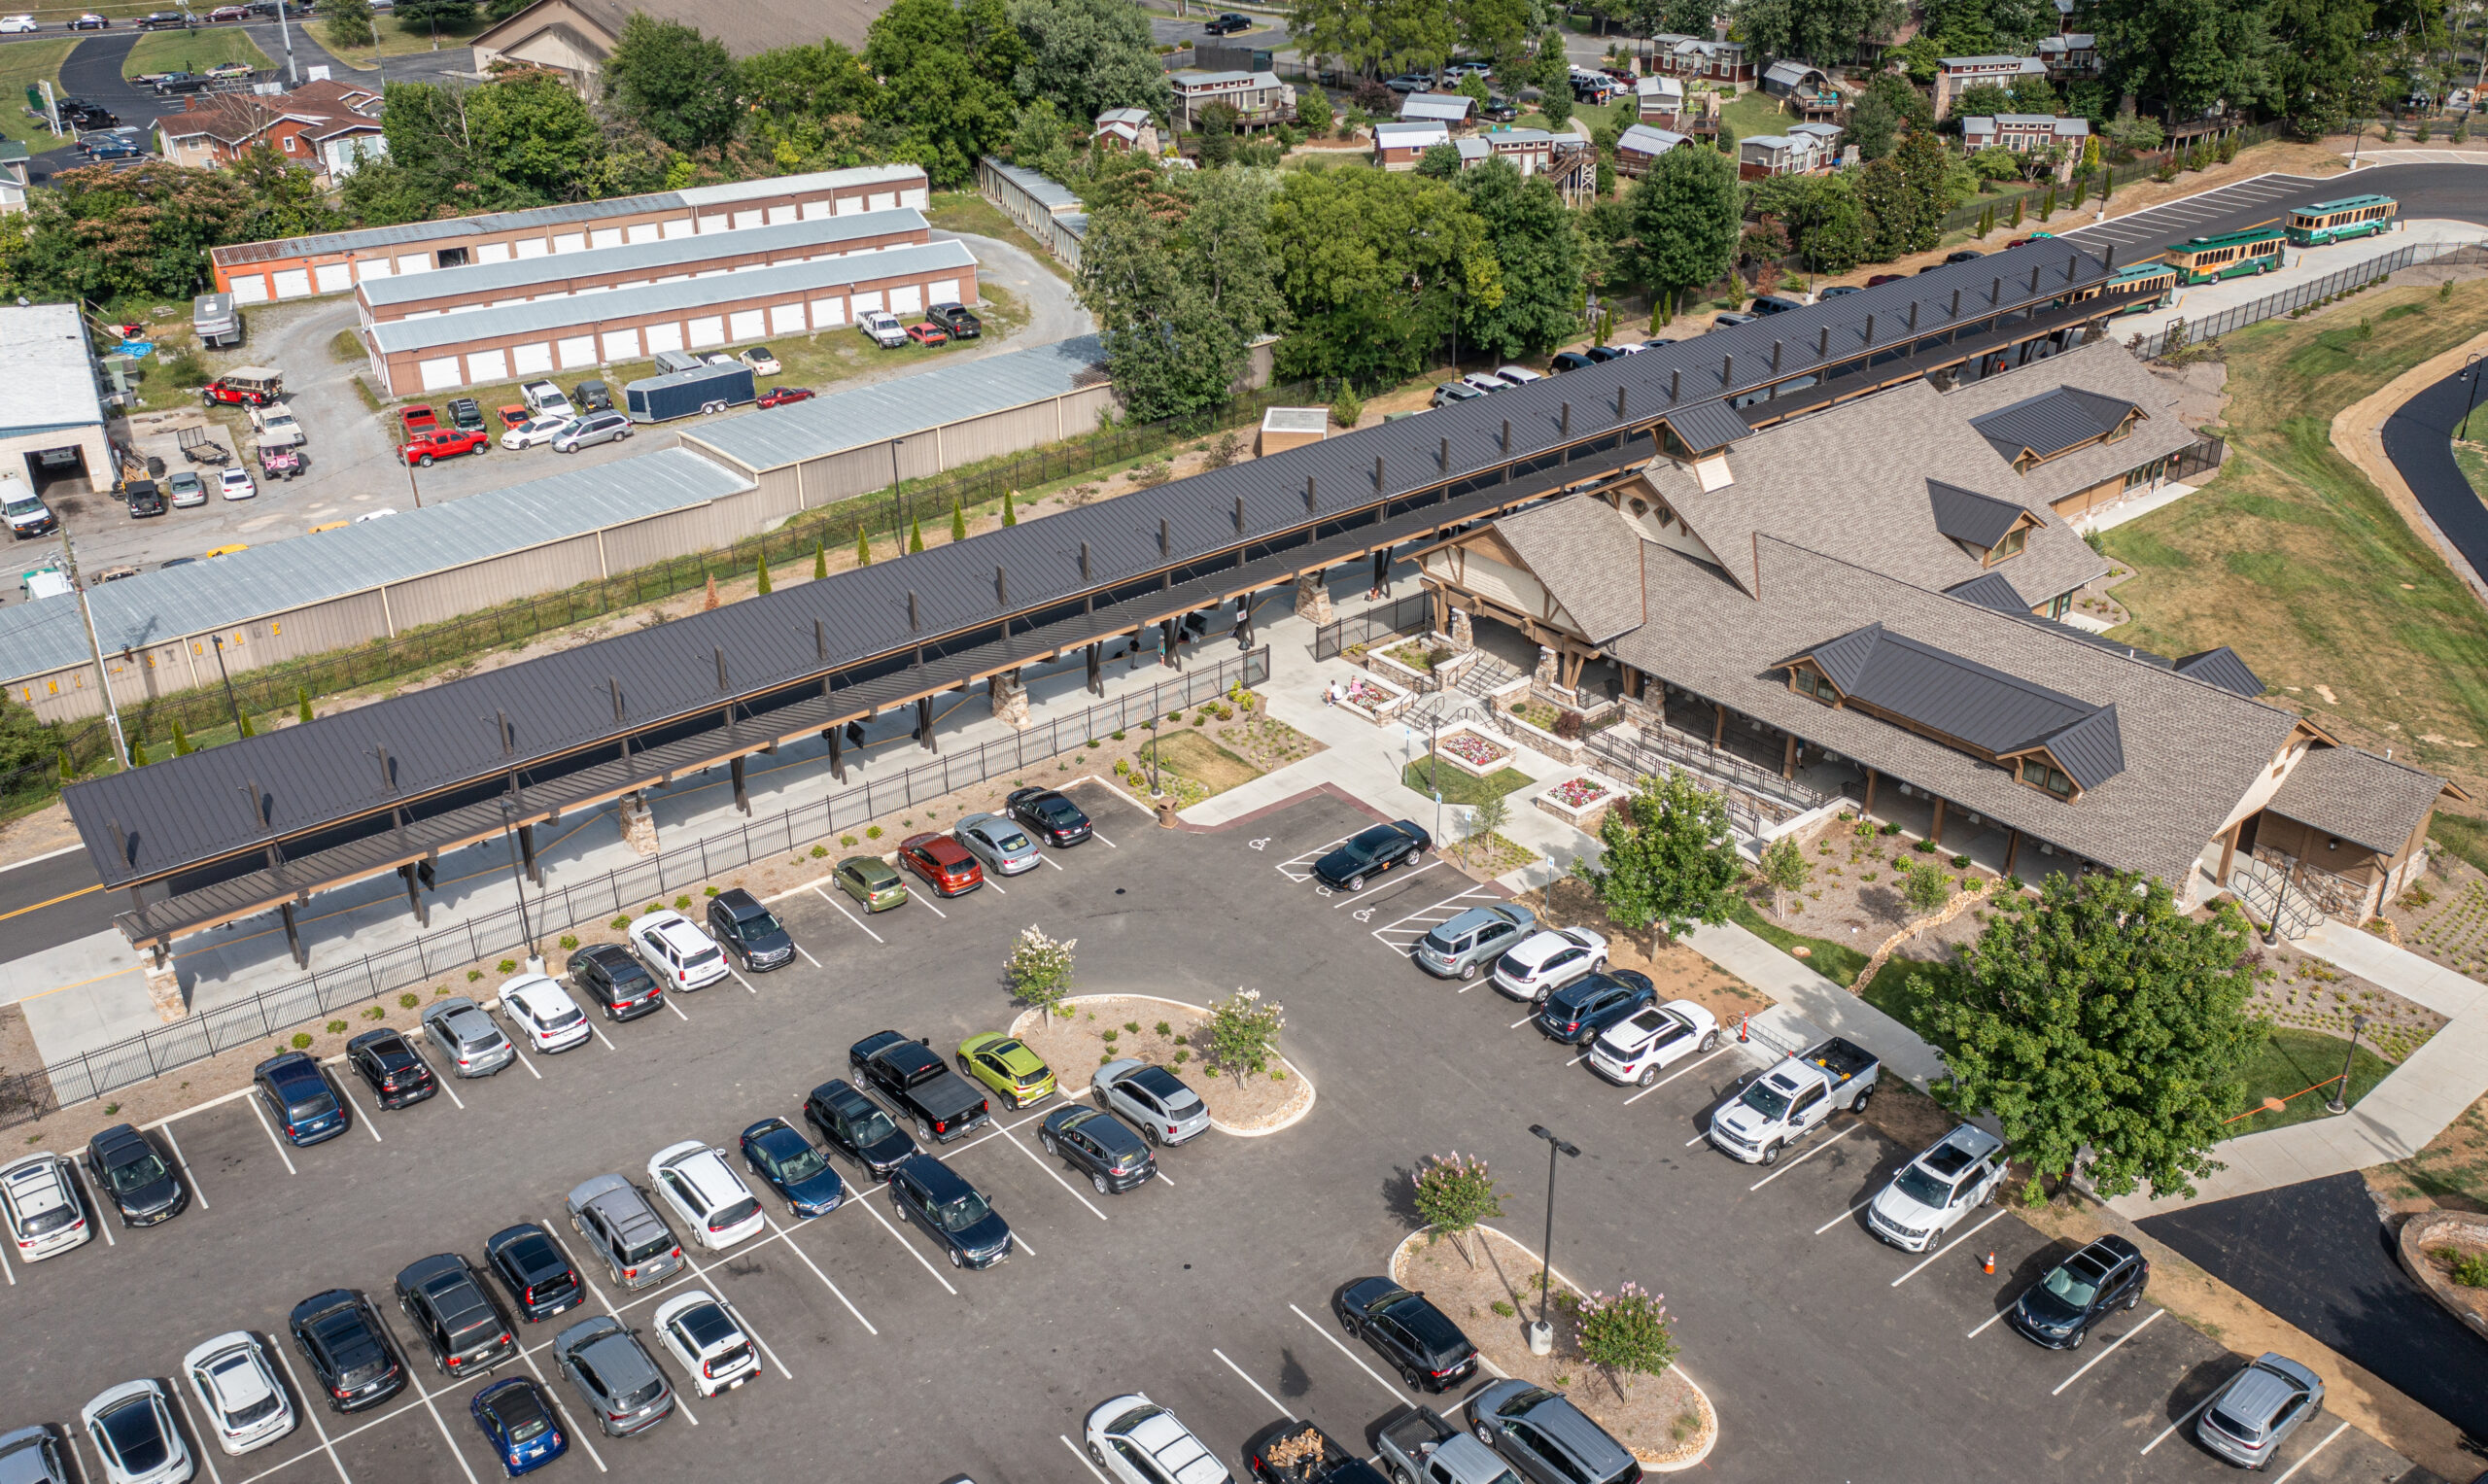 Aerial view of cars parked near a building with new roofing installed by Eskola Roofing, a local commercial roofing contractor.